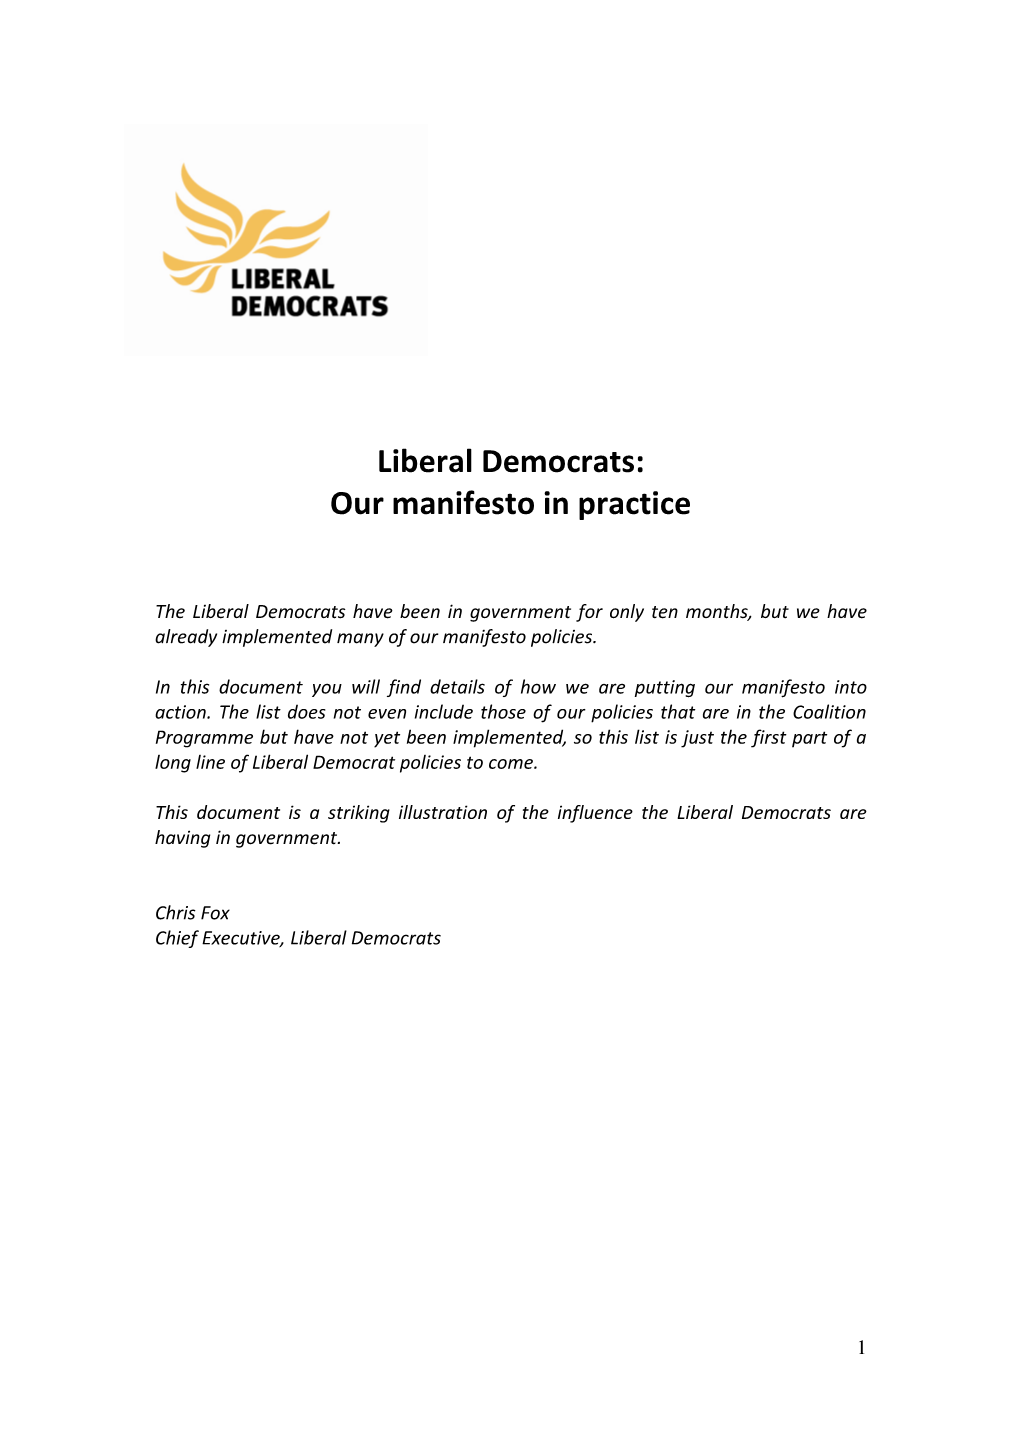 Liberal Democrats: Our Manifesto in Practice